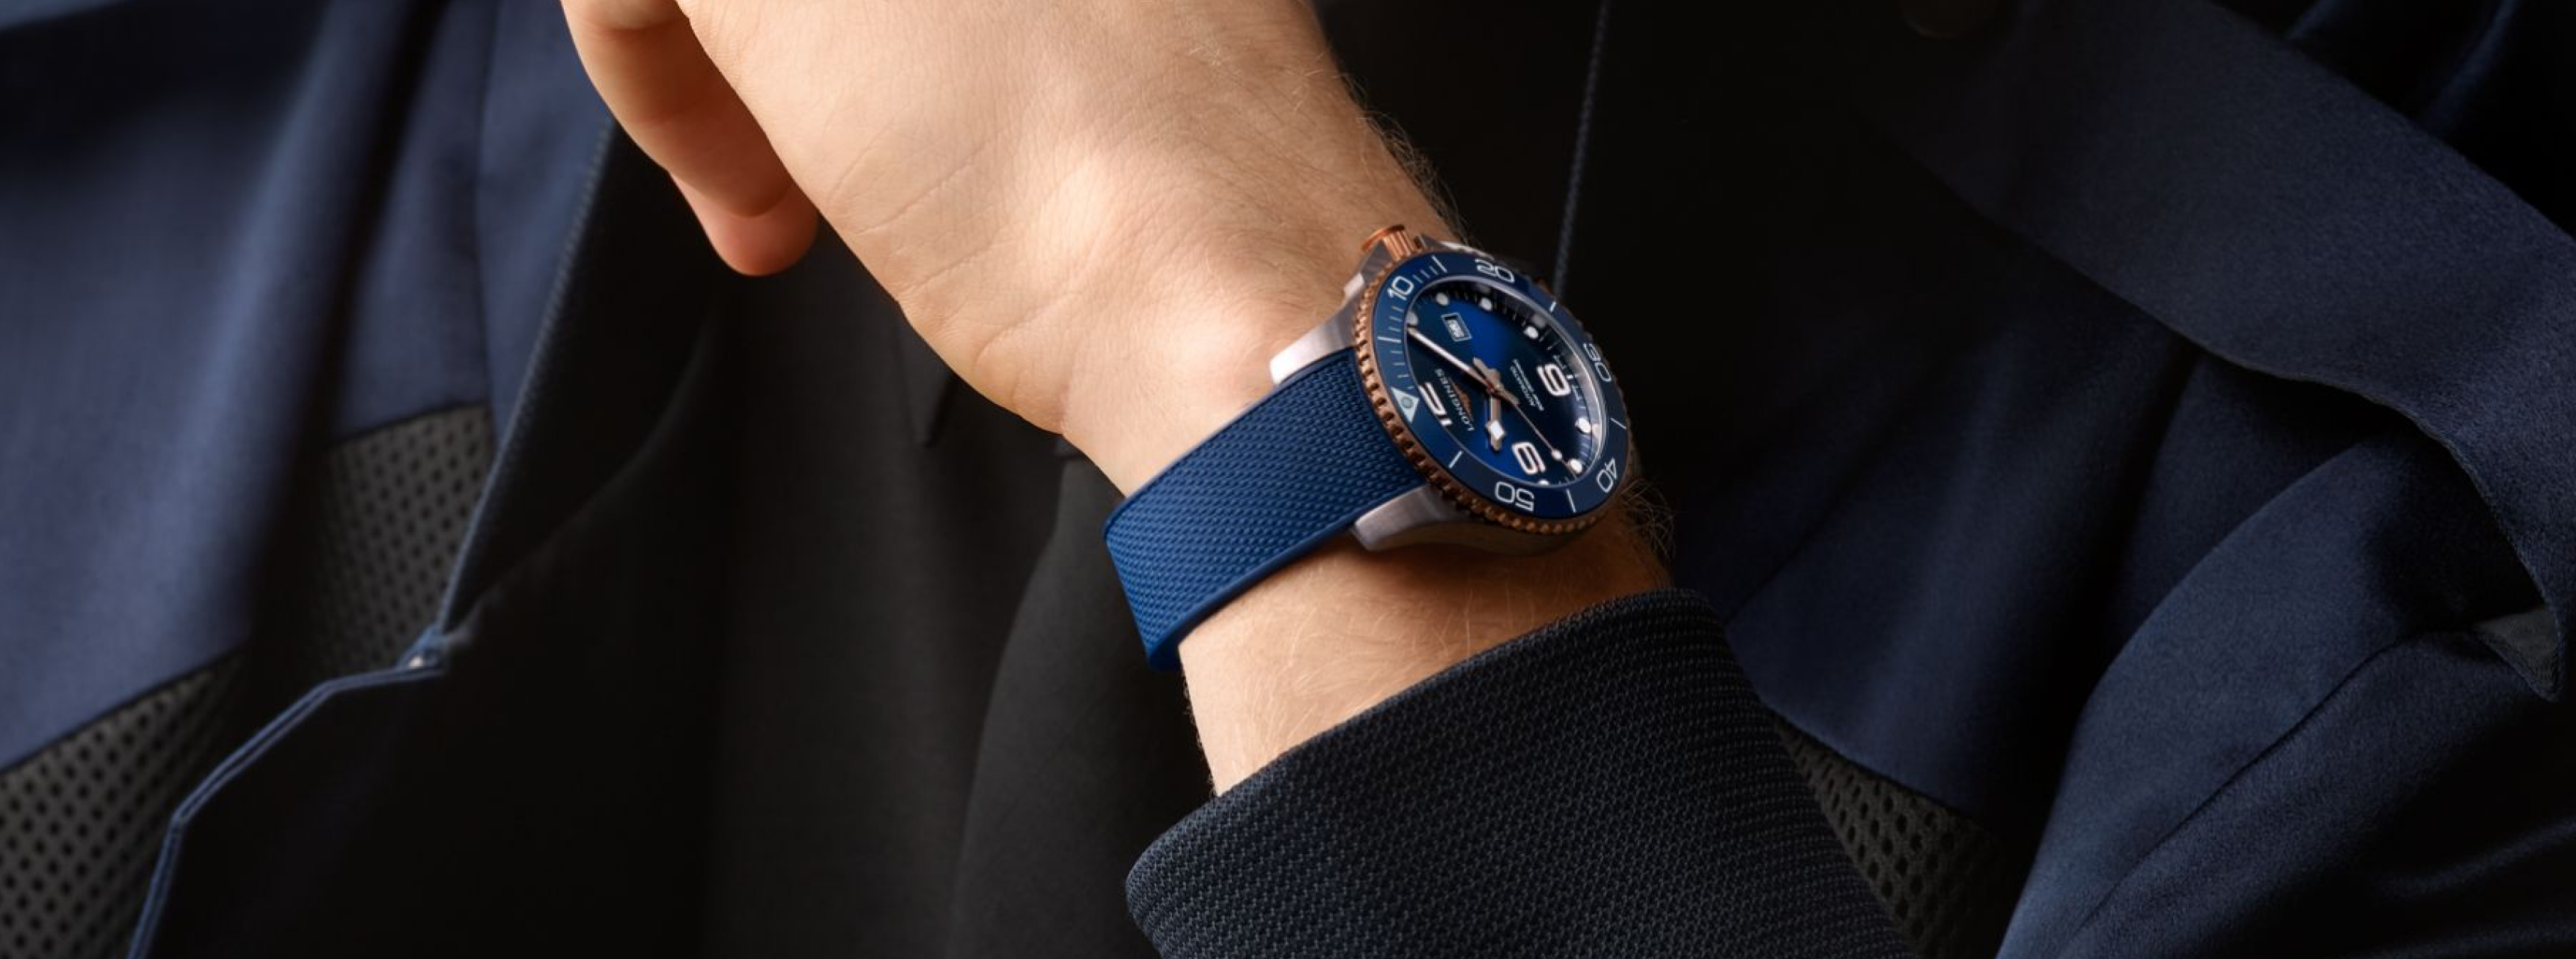 Blue watch on a man’s hand, photo shoot for the design of the Watch approach company